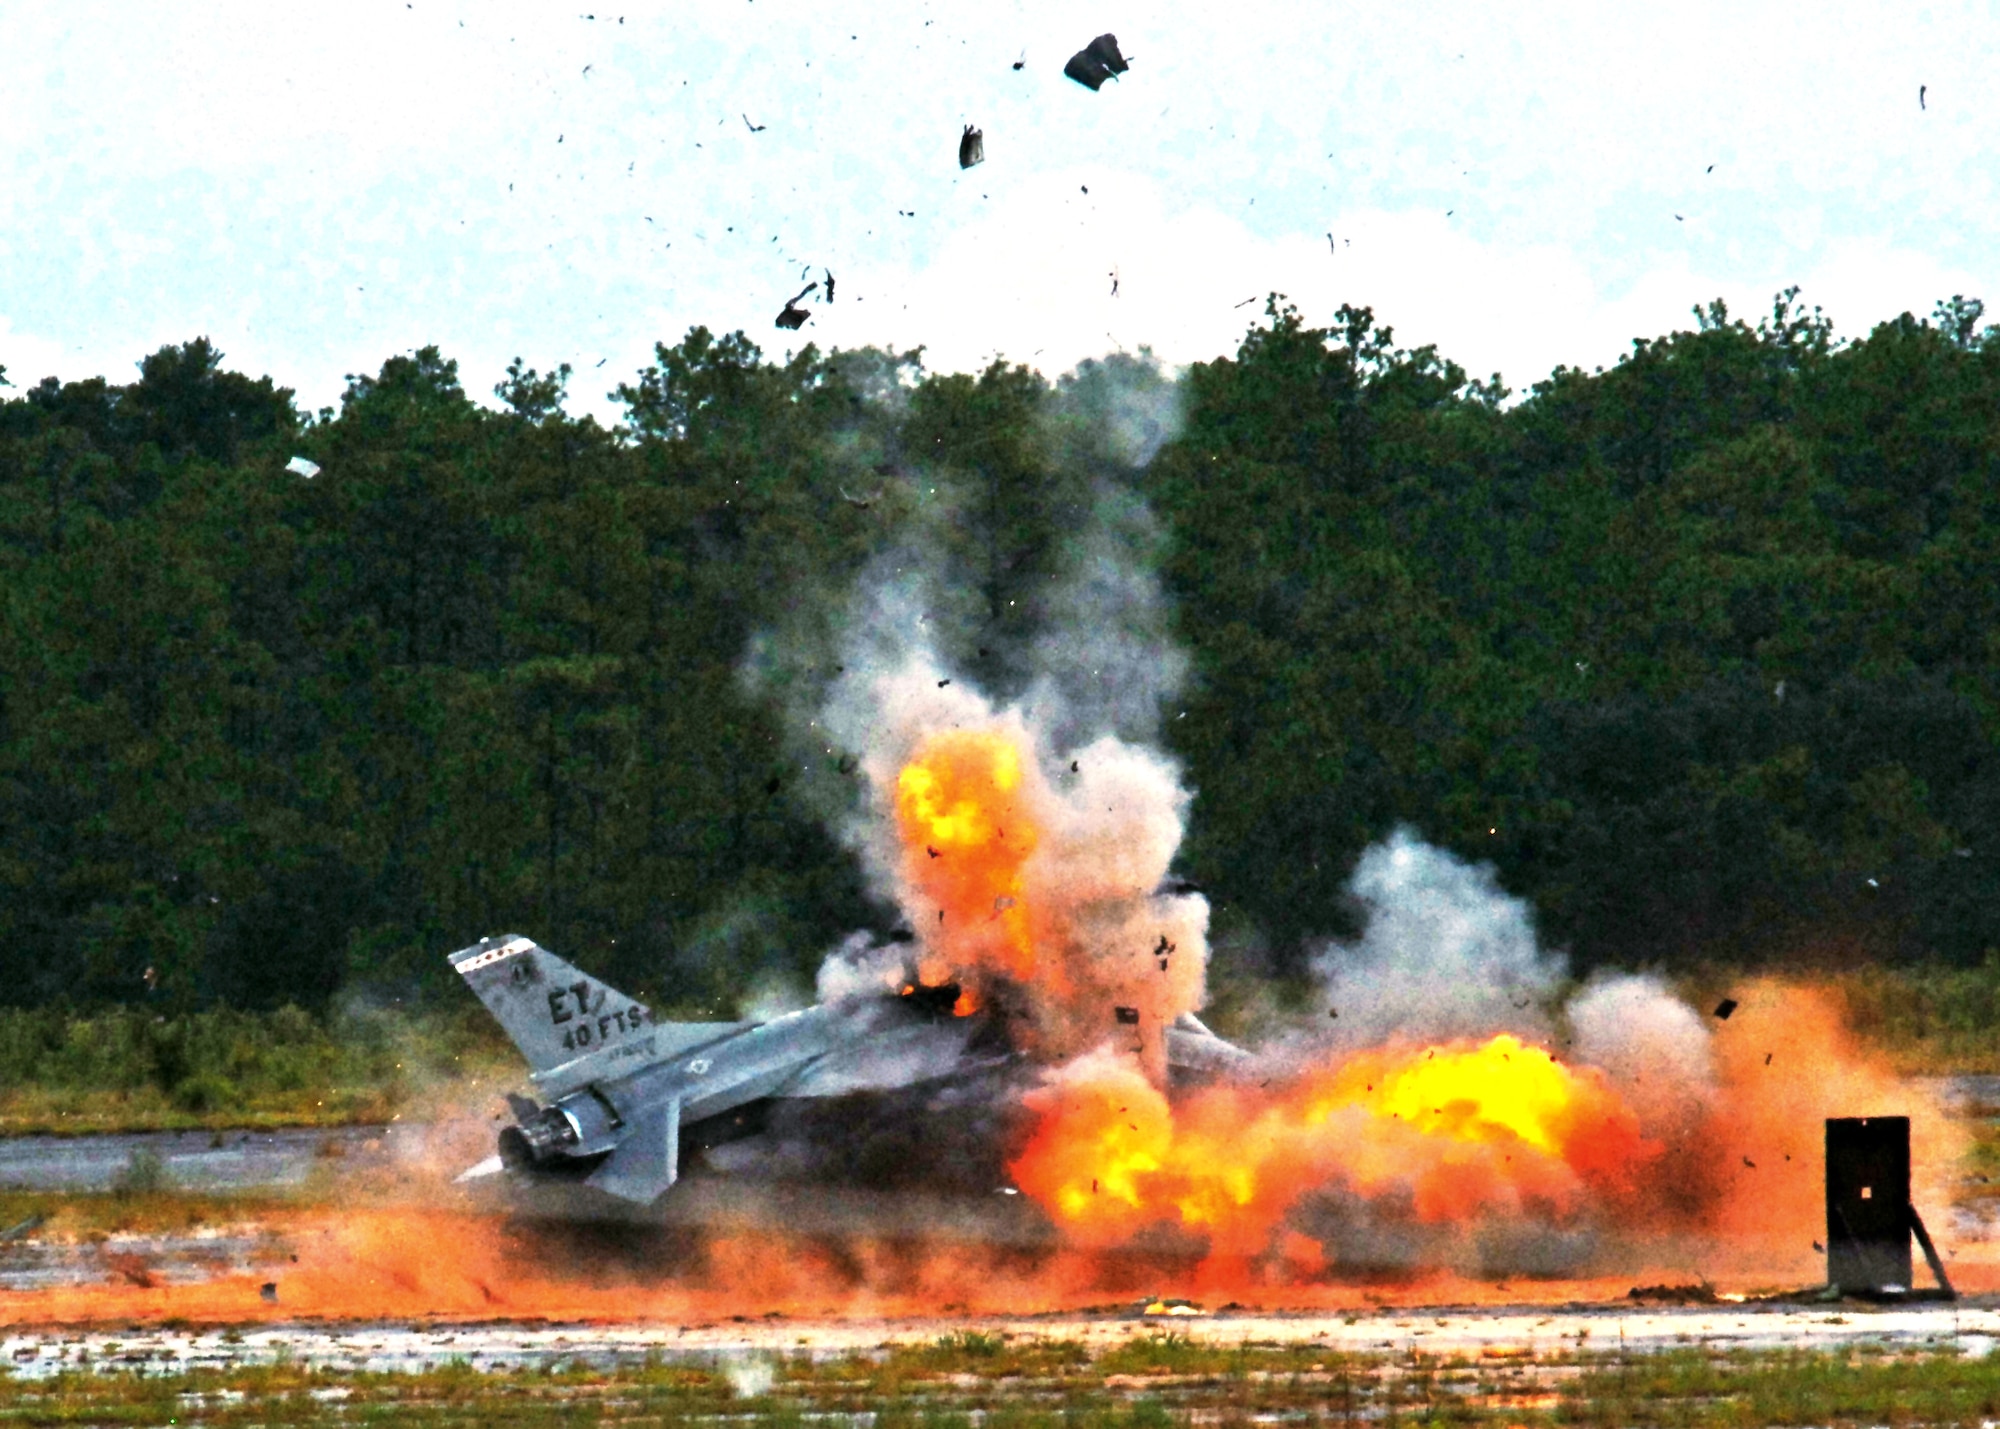 An F-16 Fighting Falcon explodes, sending debris and shrapnel into the air Aug. 19, 2010, on the range at Eglin Air Force Base, Fla. The explosion was a static test of the flight termination system to be used in the QF-16, a supersonic reusable full-scale aerial target drone modified from an F-16. The purpose of the test was to demonstrate that the FTS design will be sufficient to immediately terminate the flight of a QF-16, as well as to determine a range safety debris footprint. (U.S. Air Force photo/Samuel King Jr.) 